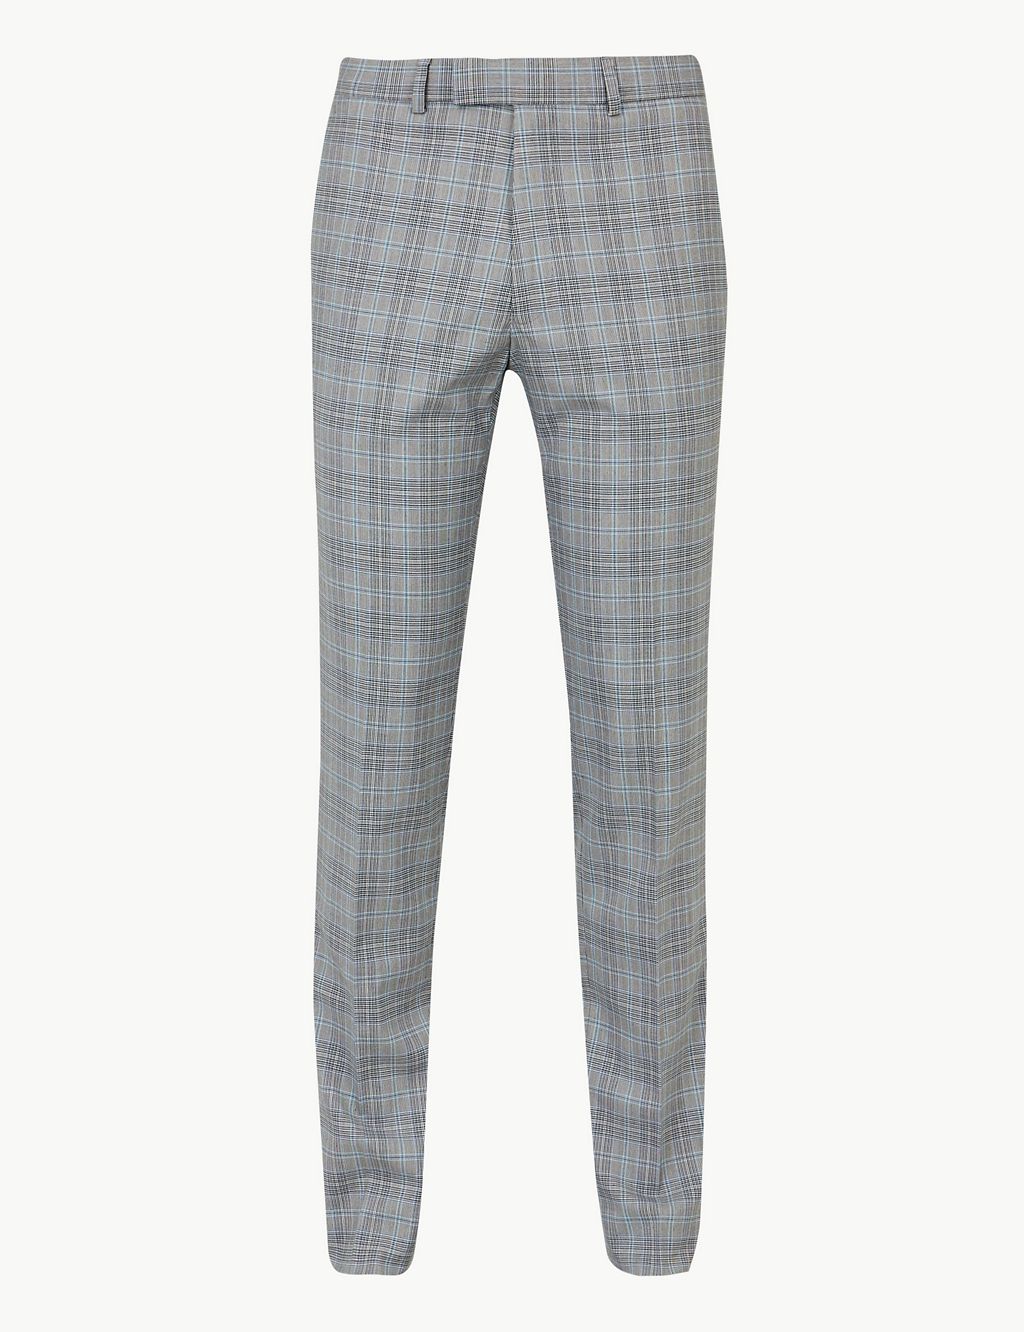 Grey Checked Skinny Fit Trousers 1 of 5